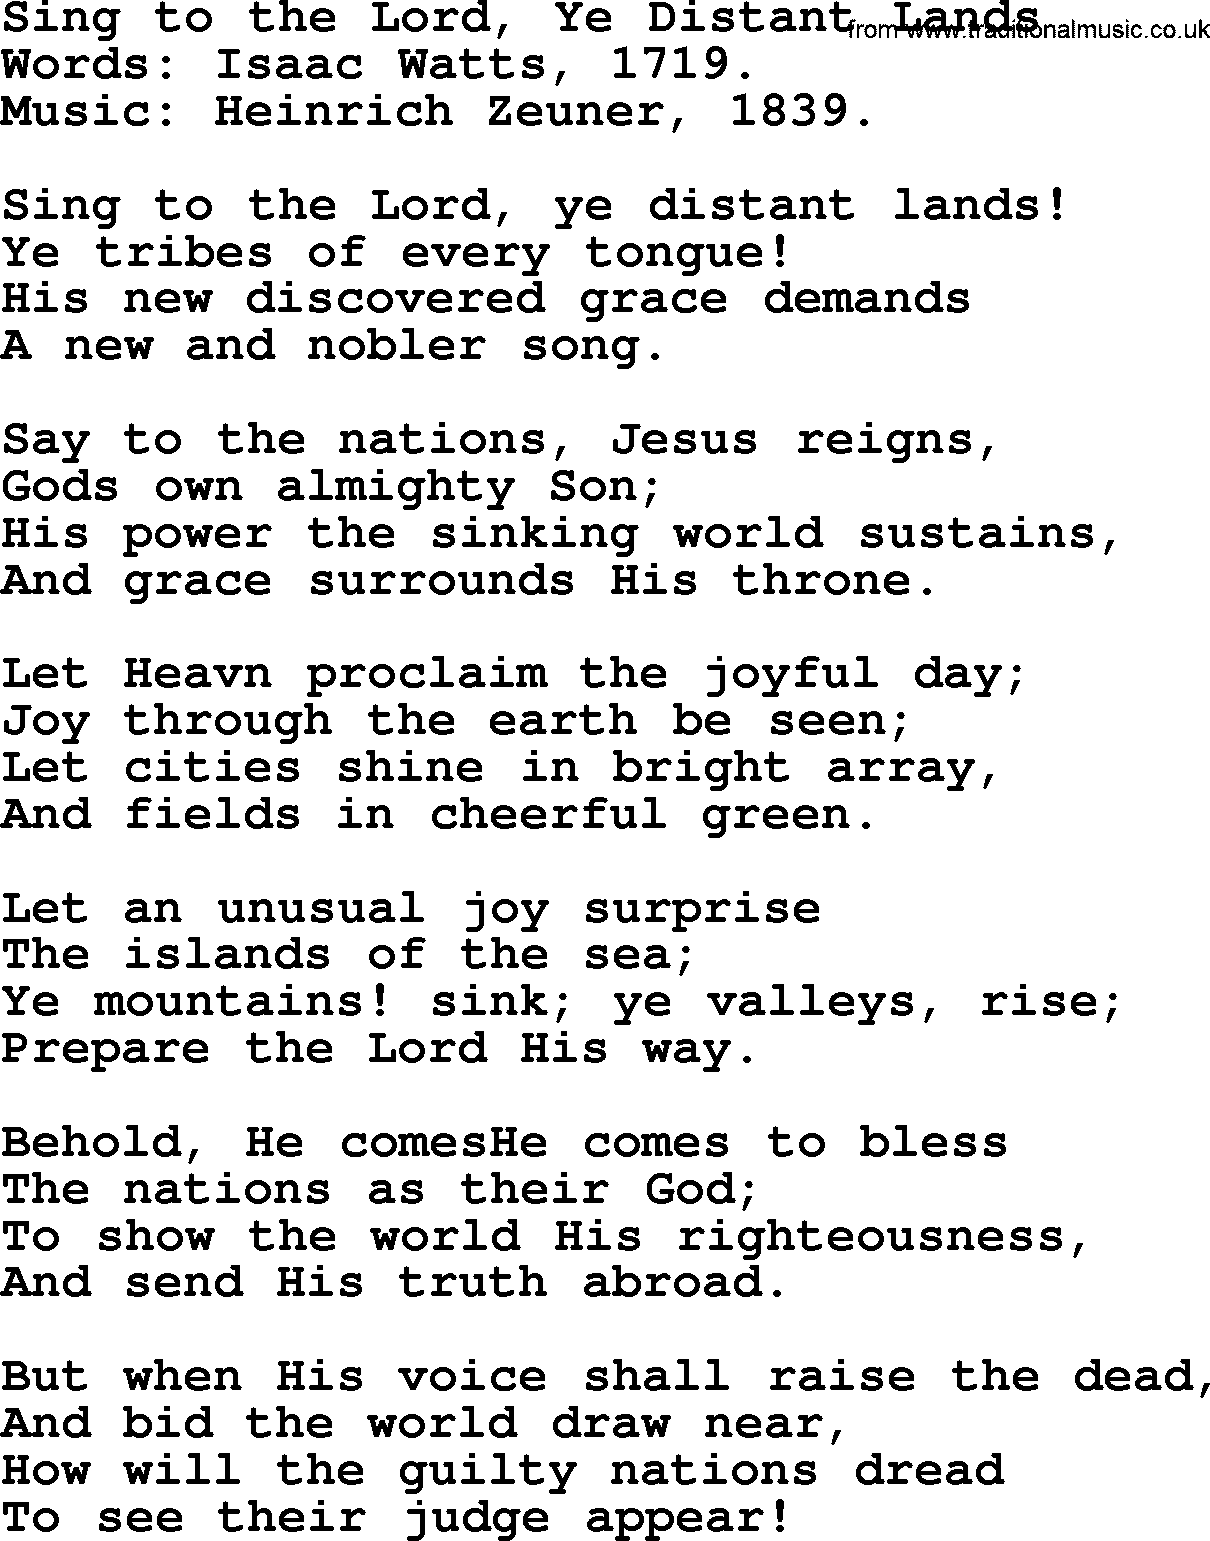 Isaac Watts Christian hymn: Sing to the Lord, Ye Distant Lands- lyricss